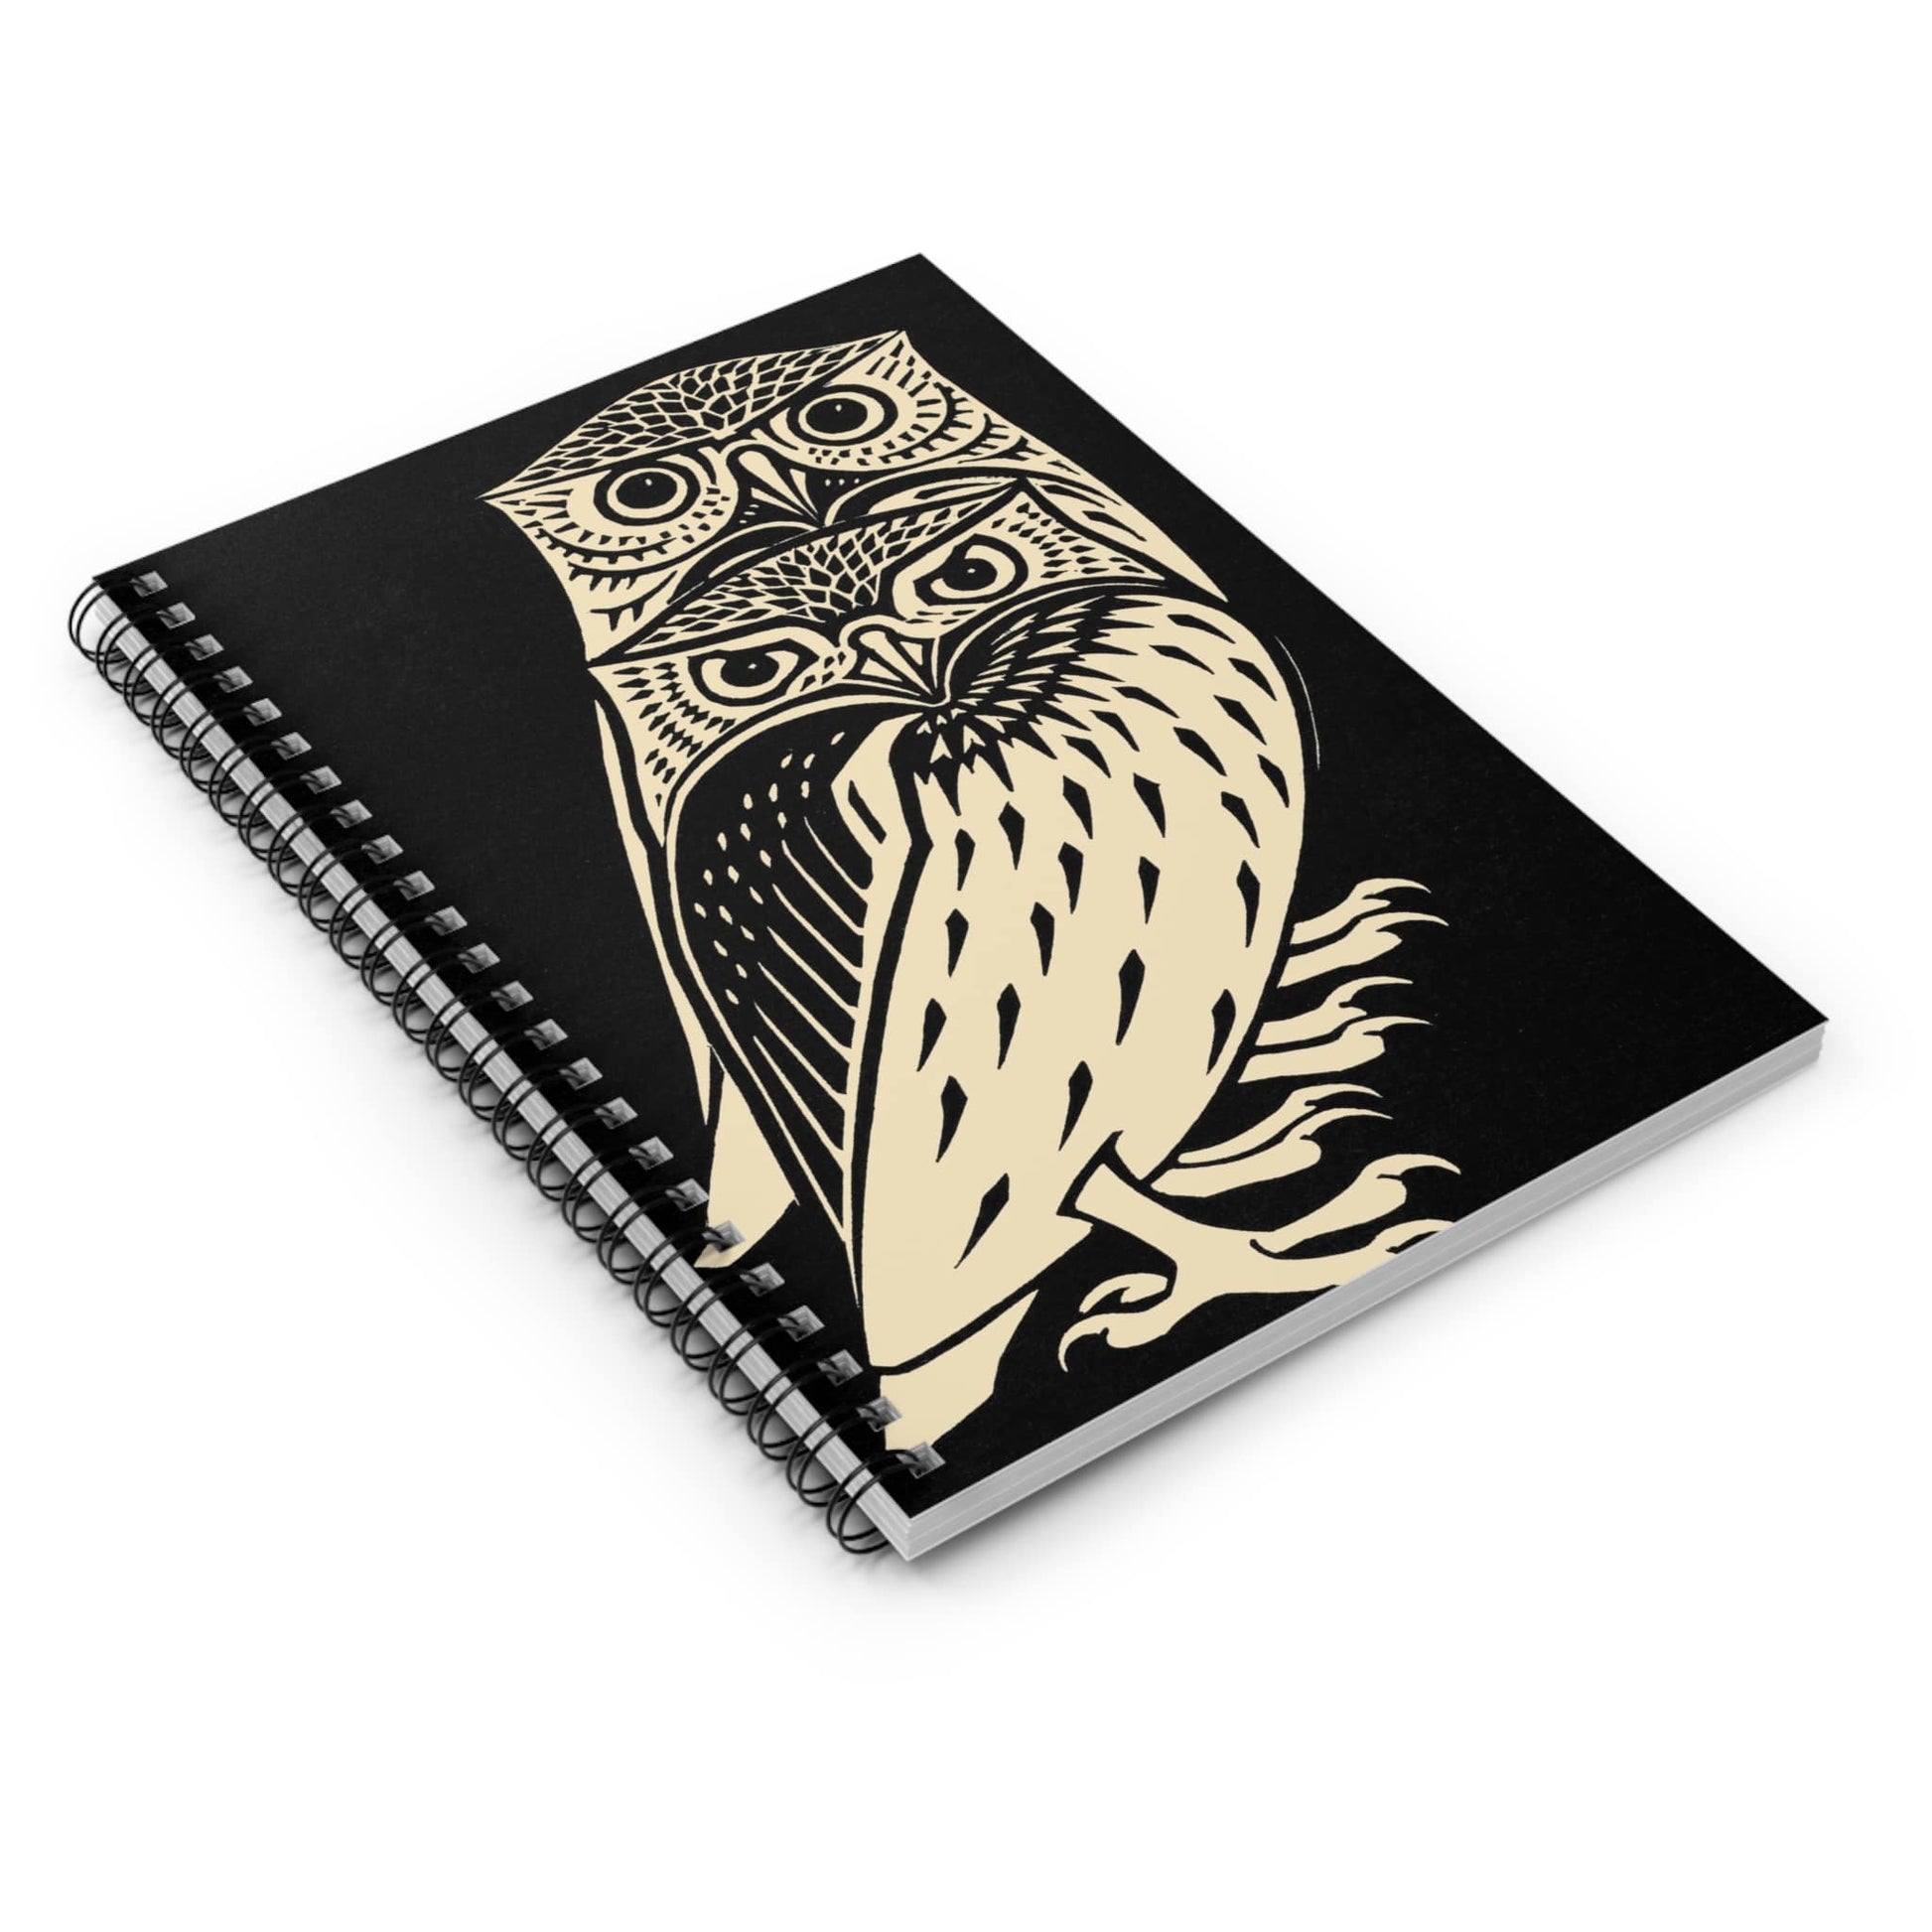 Unique Owl Spiral Notebook Laying Flat on White Surface